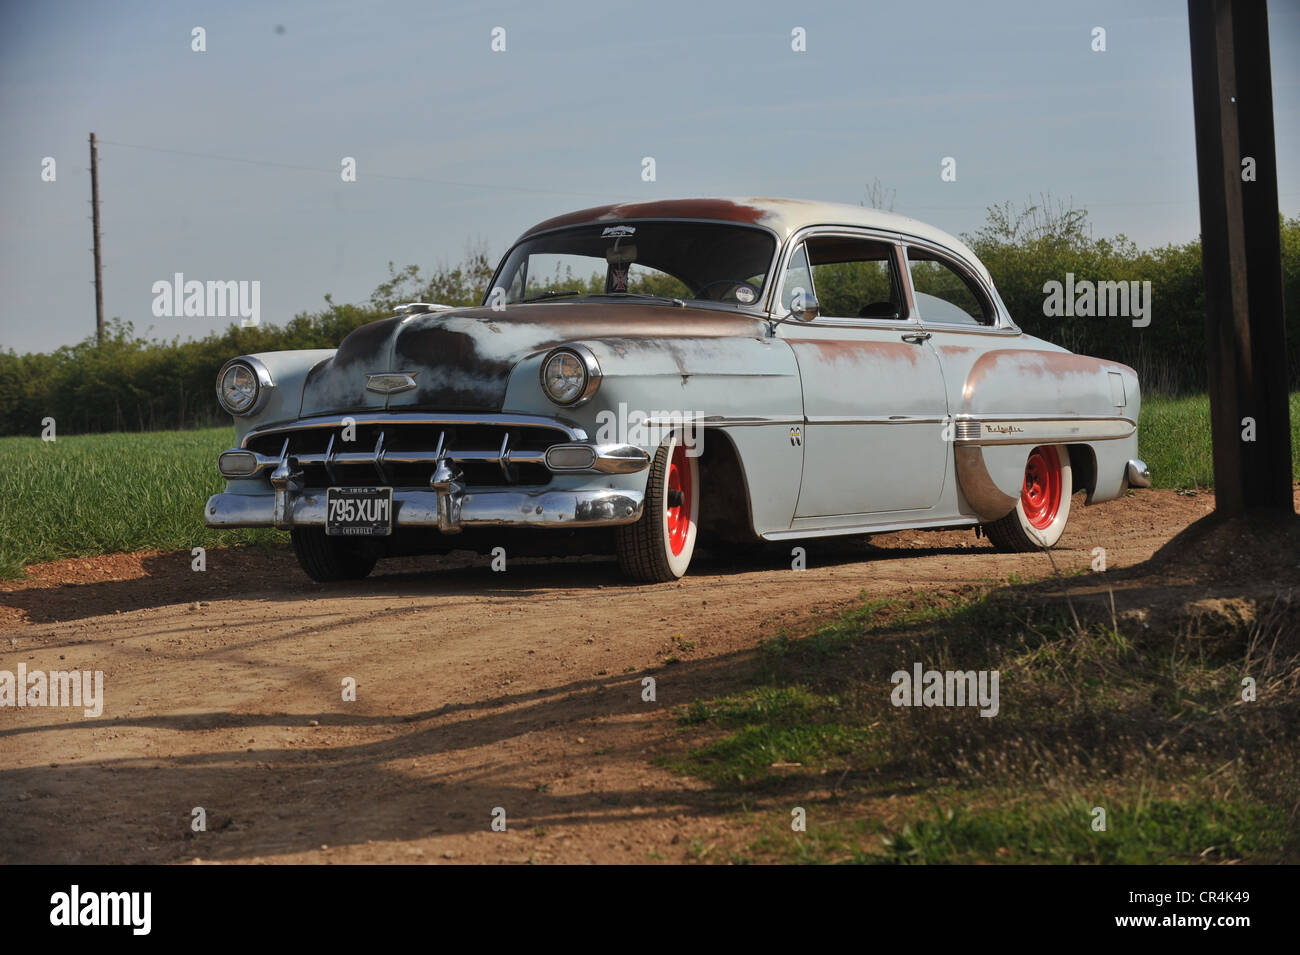 Rat look 1954 Chevrolet Bel air classic sun bleached American car, lightly hot rodded Stock Photo